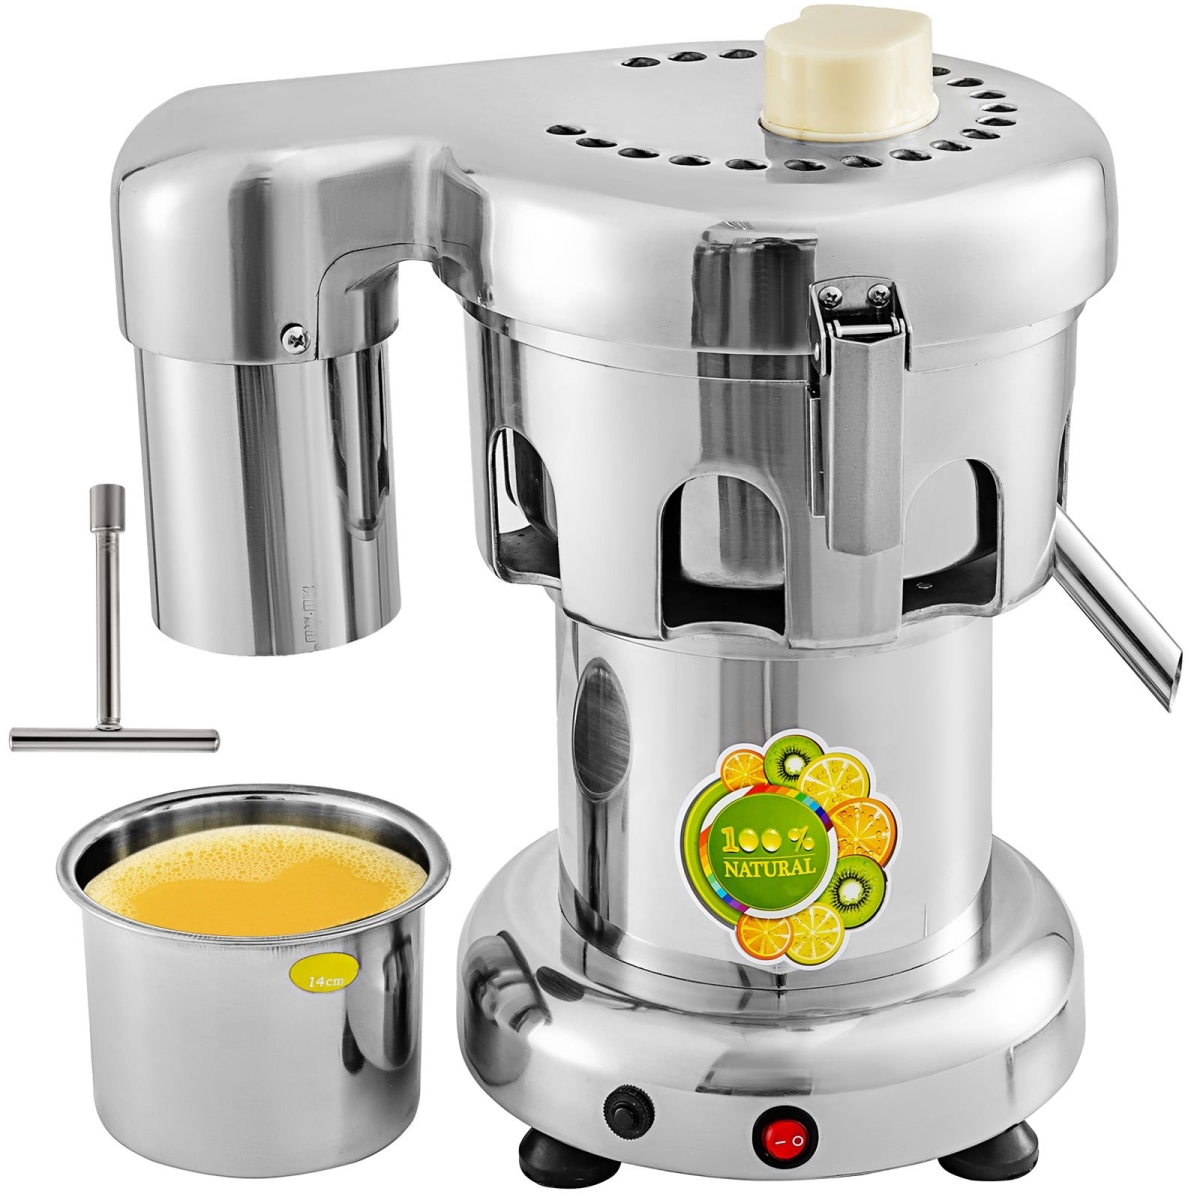 Picture of Vevor WF-A3000ZXBXGZZJ1V1 Commercial Juice Extractor Heavy Duty Juicer Aluminum Casting & Stainless Steel Constructed Centrifugal Juice Extractor Juicing Both Fruit & Vegetable